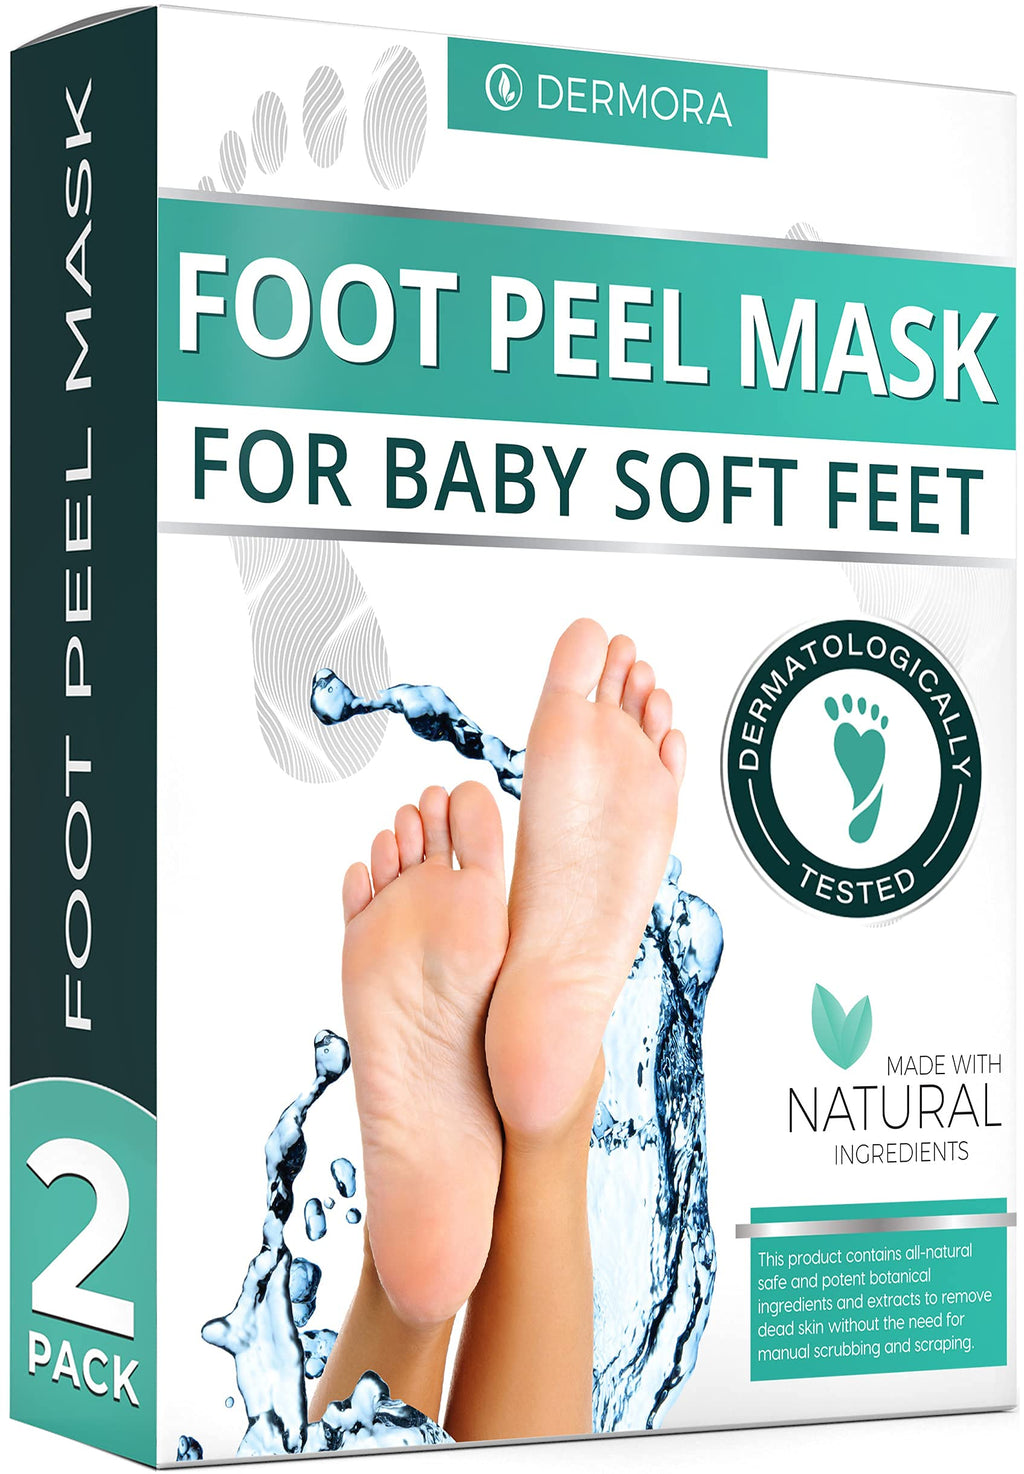 [Australia] - Foot Peel Mask - 2 Pack - For Cracked Heels, Dead Skin & Calluses - Make Your Feet Baby Soft & Get a Smooth Skin, Removes & Repairs Rough Heels, Dry Toe Skin - Exfoliating Peeling Natural Treatment 